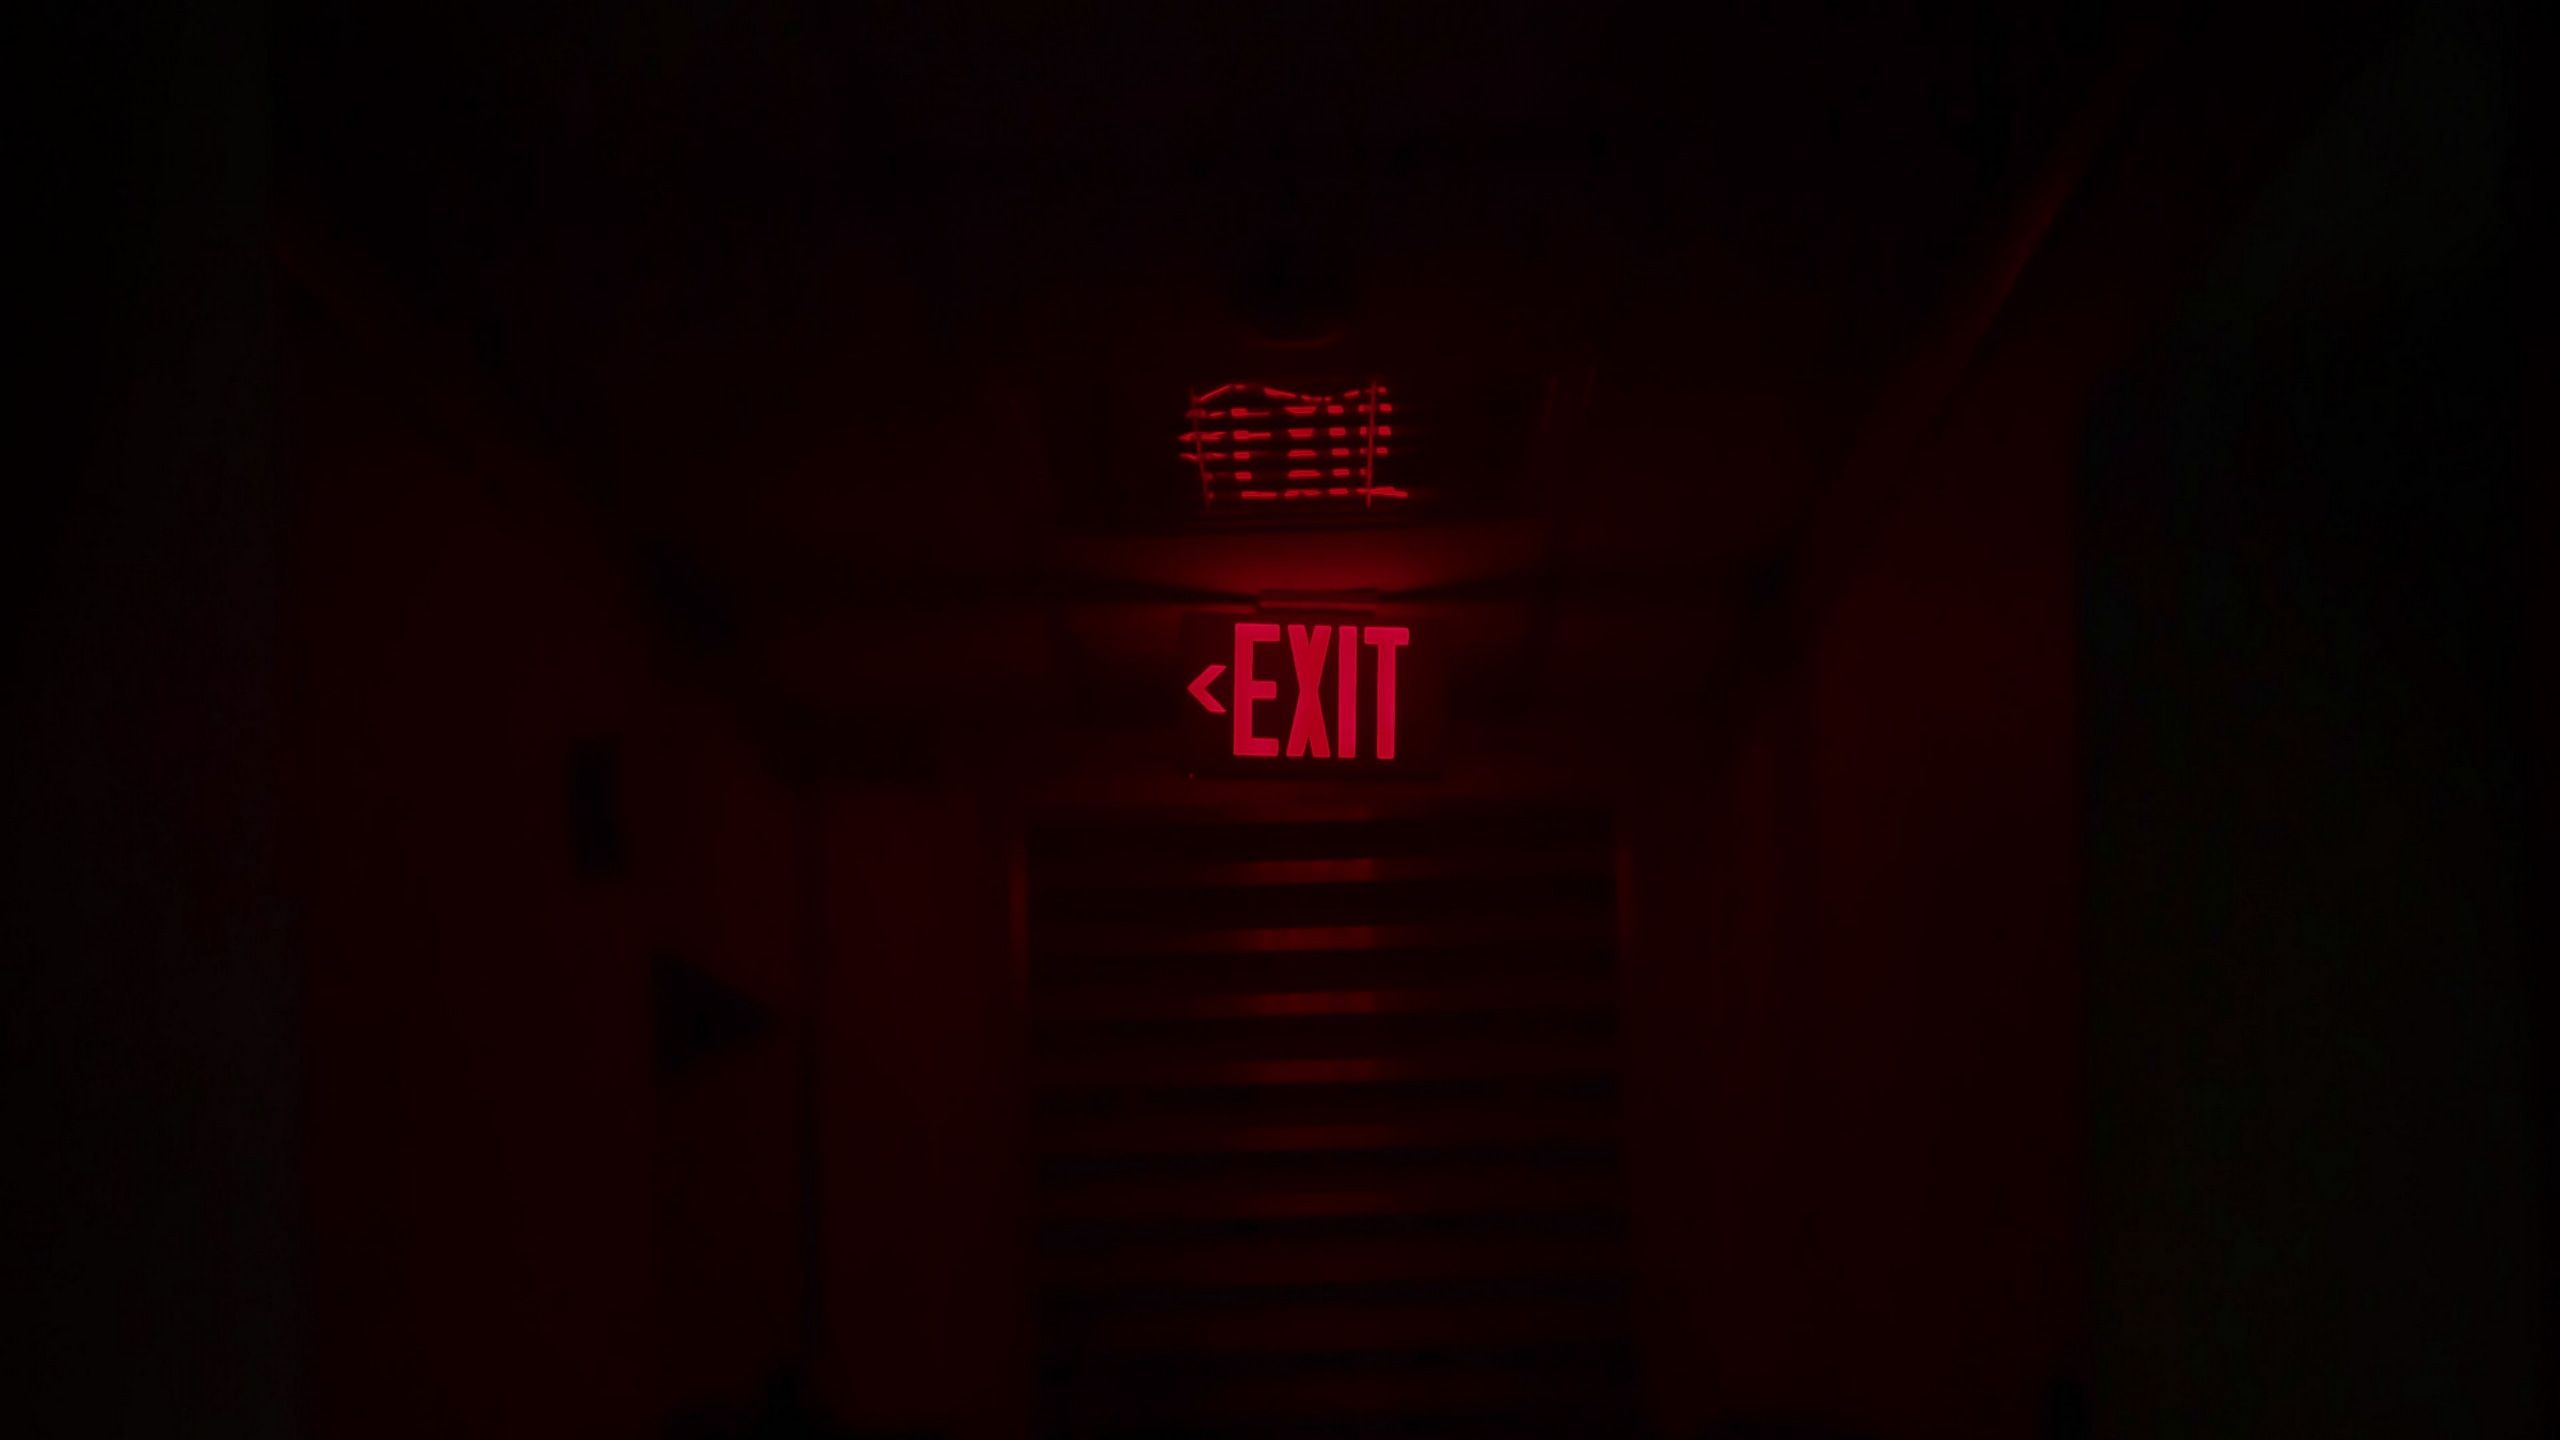 Wallpaper / inscription, exit, neon, red, 4k free download